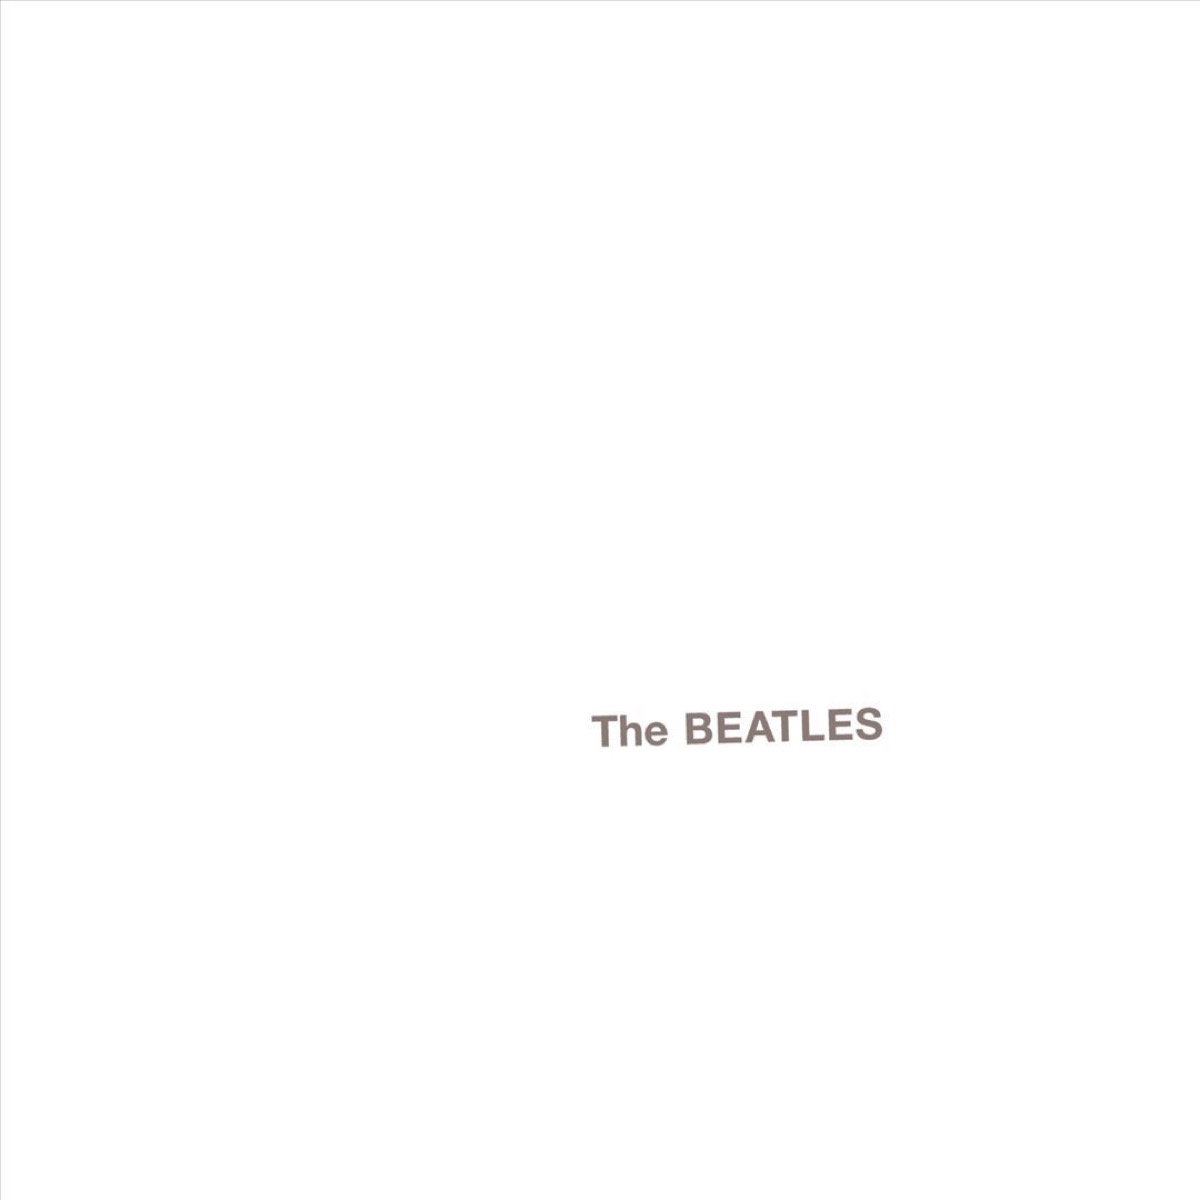 "The White Album: 50th Anniversary" by The Beatles album cover